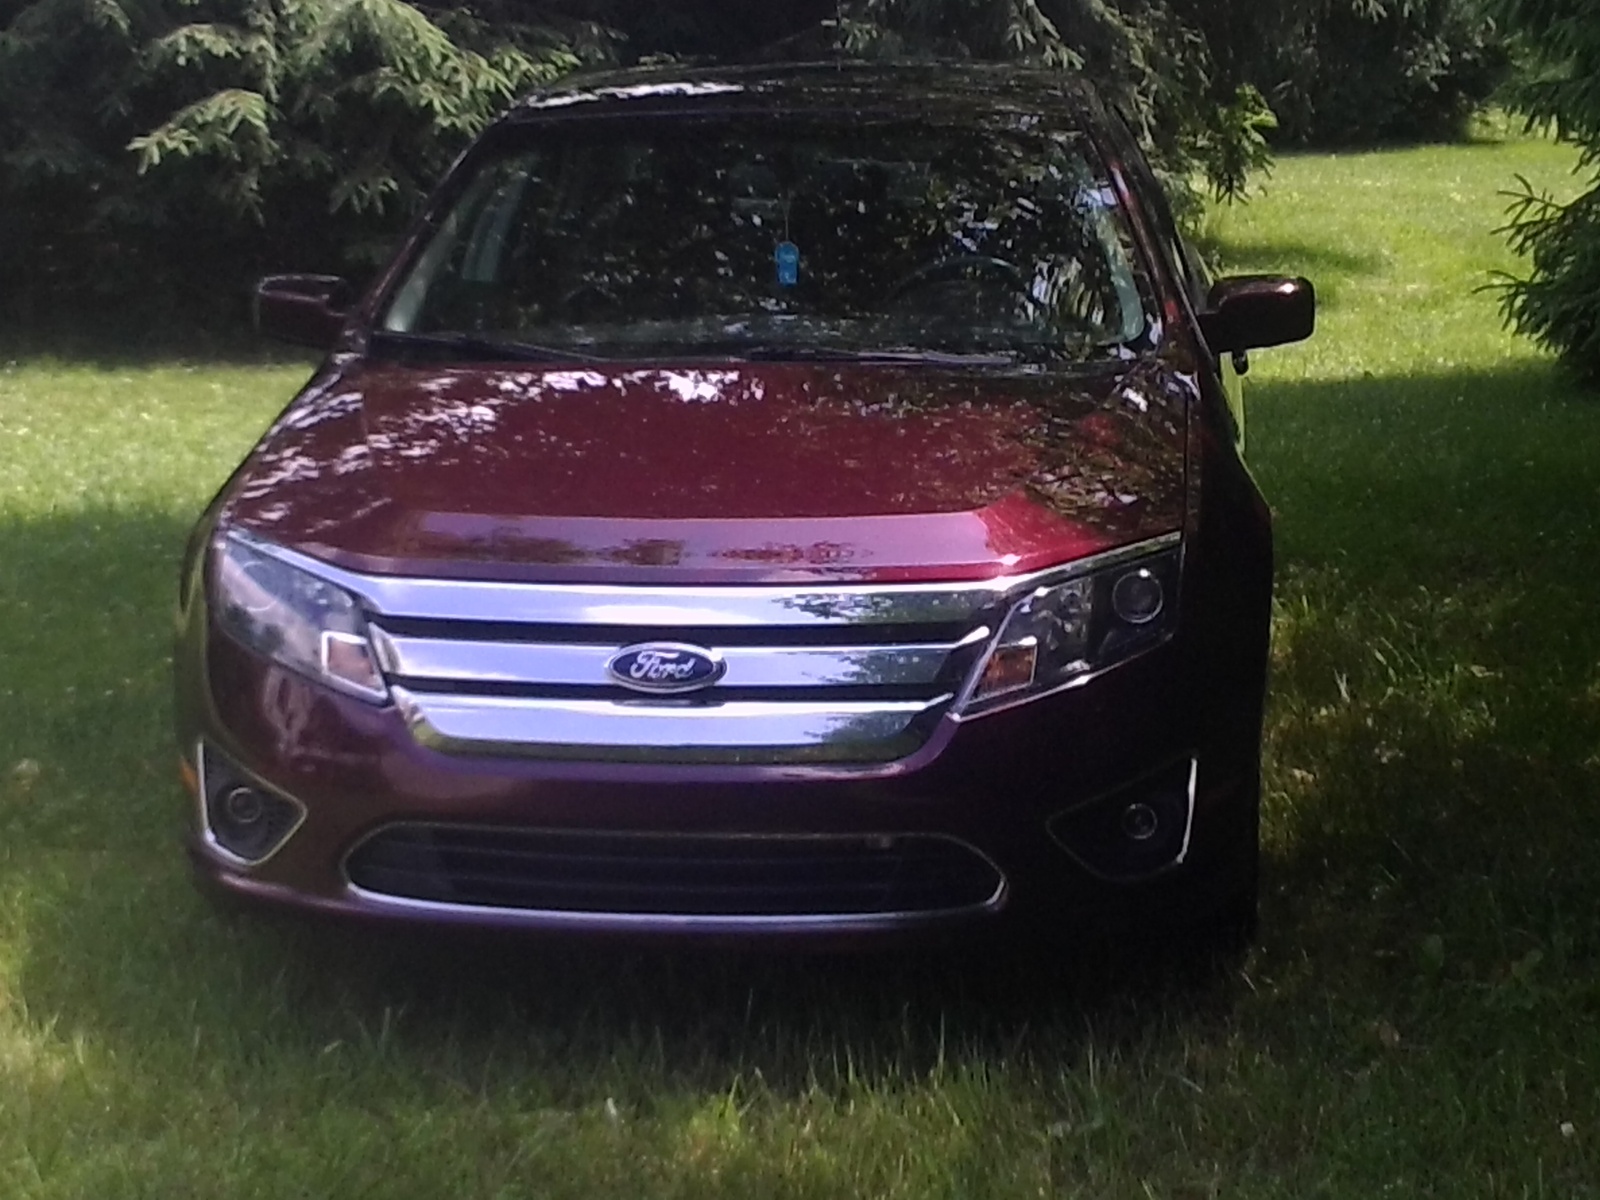 2011 Ford fusion resale value #6